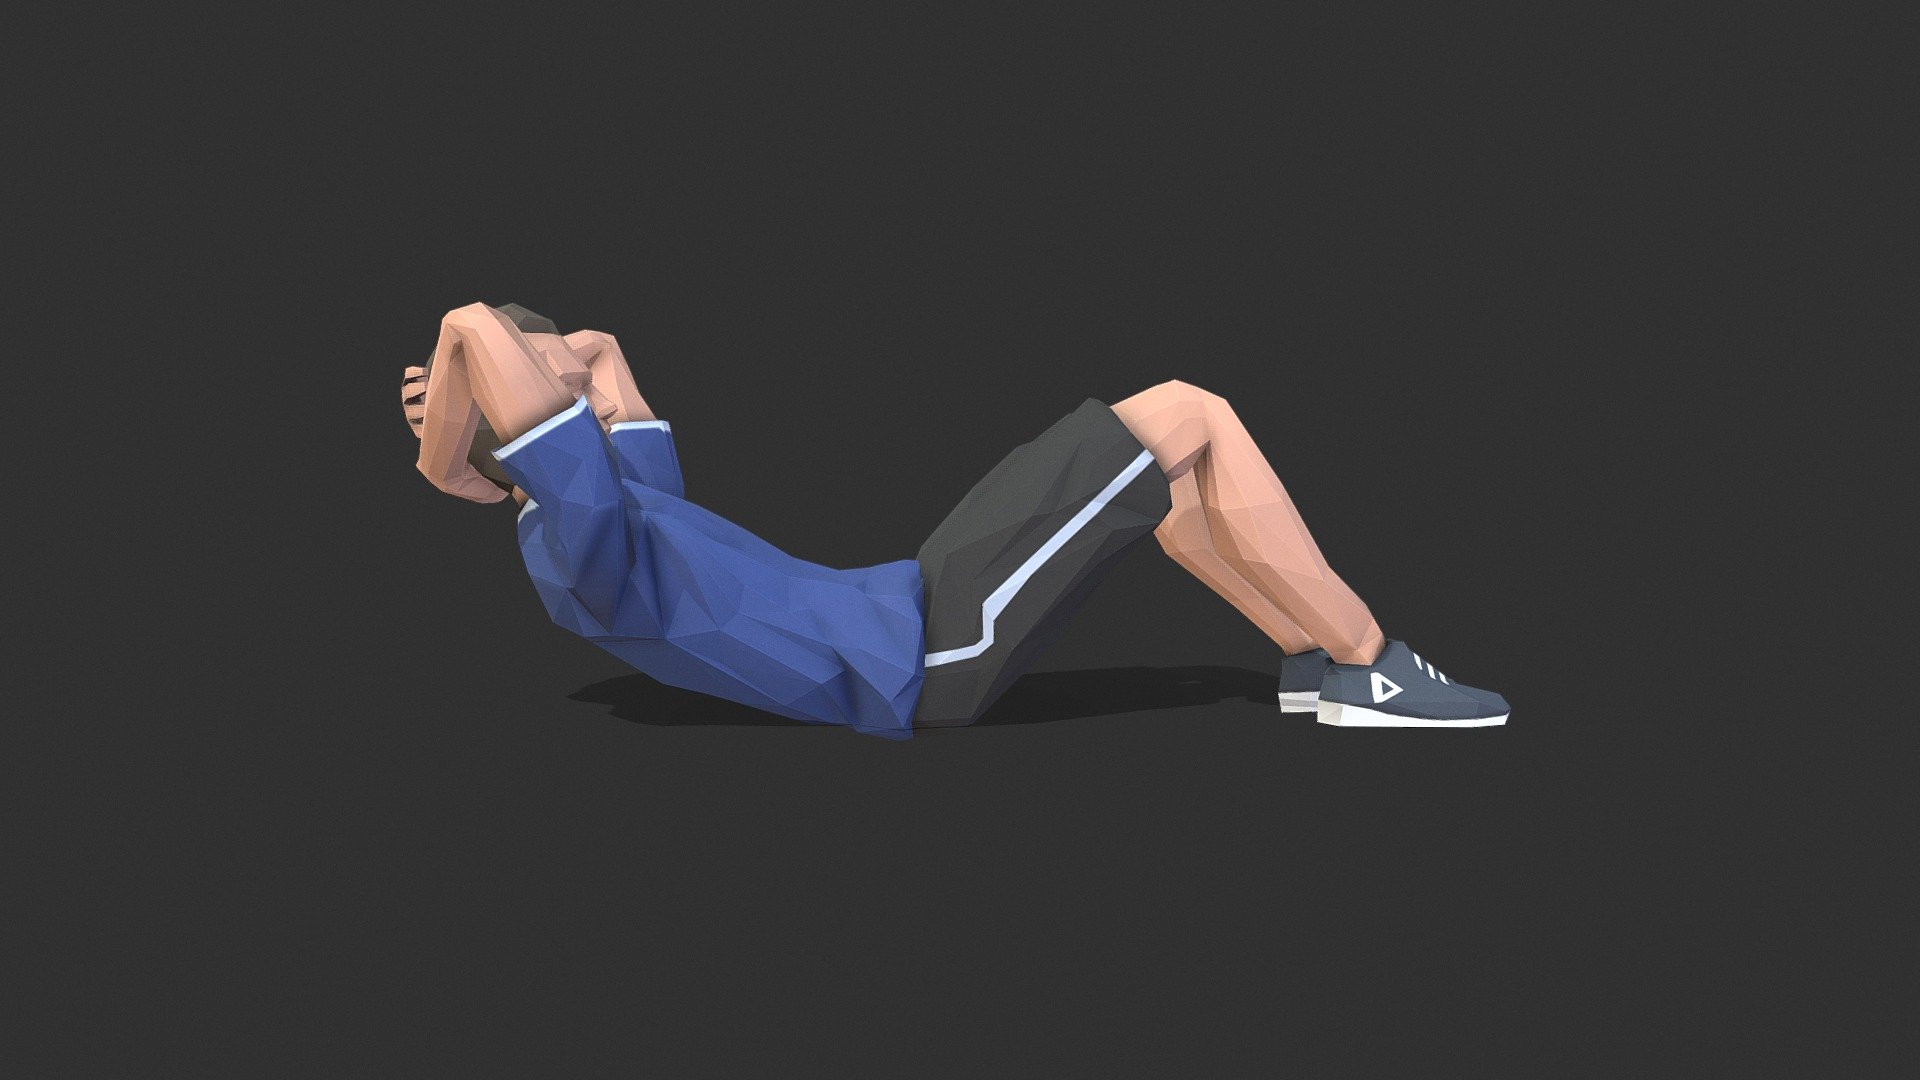 Animations of exercise Man Low poly 3d model in flat surface style 3d model